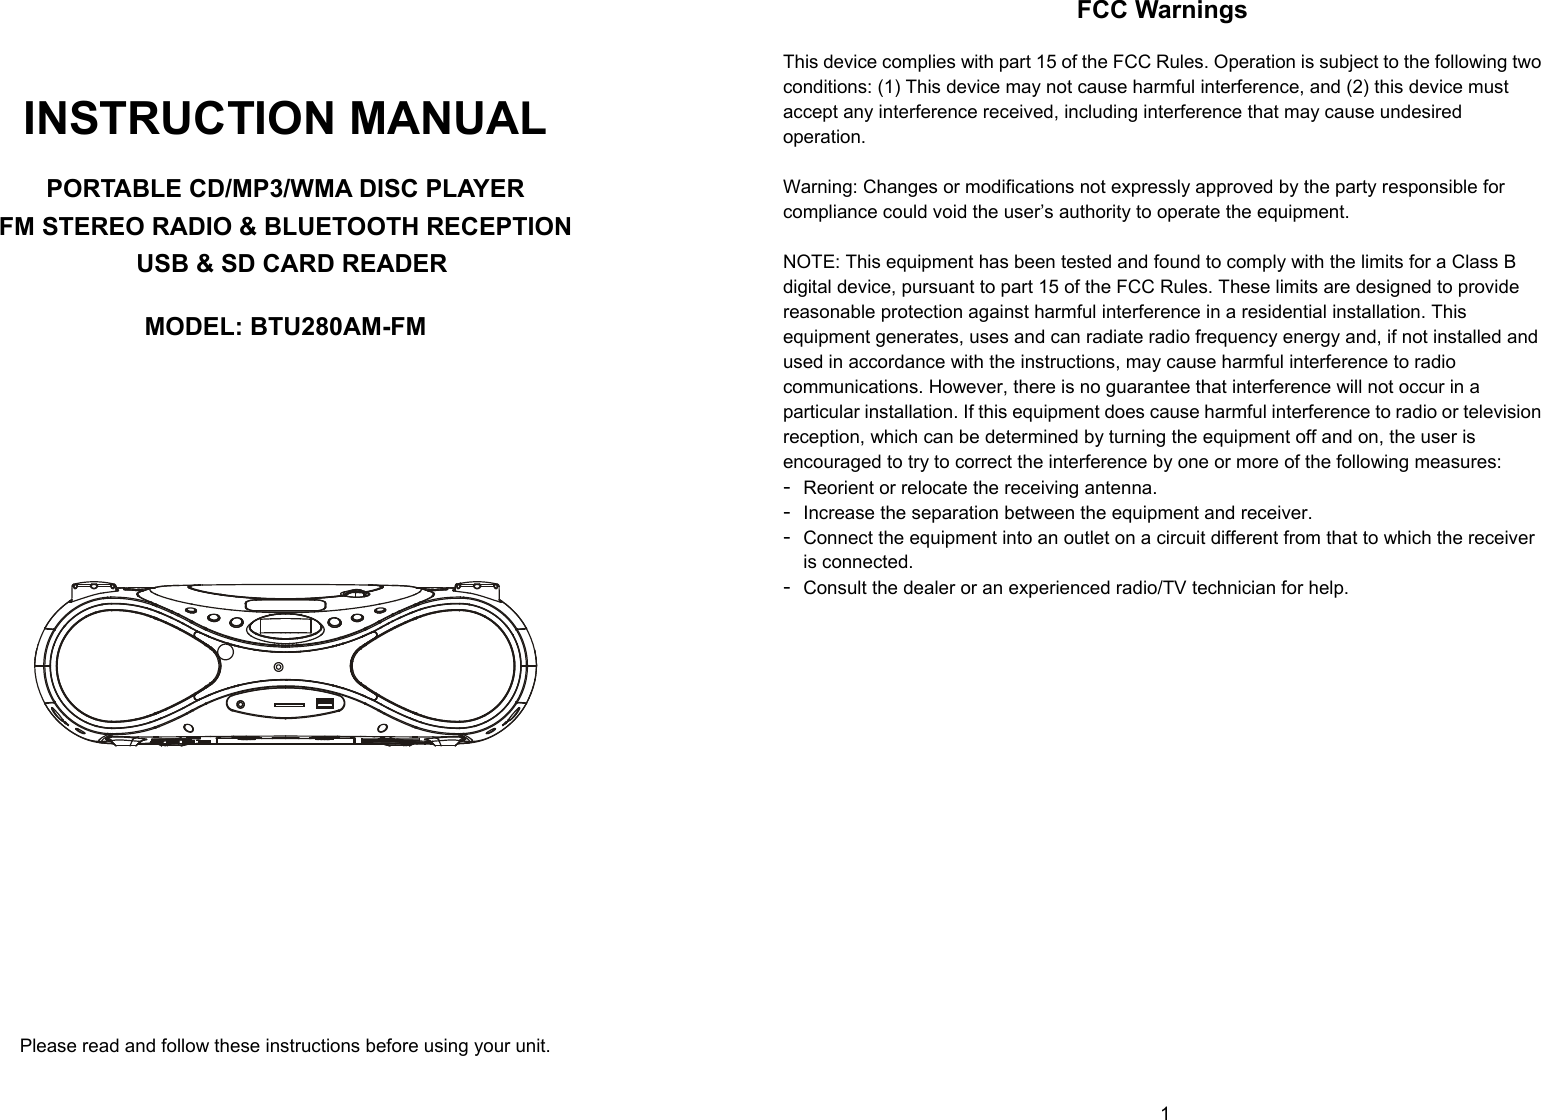   0        1     INSTRUCTION MANUAL  PORTABLE CD/MP3/WMA DISC PLAYER FM STEREO RADIO &amp; BLUETOOTH RECEPTION  USB &amp; SD CARD READER  MODEL: BTU280AM-FM                      Please read and follow these instructions before using your unit.  FCC Warnings  This device complies with part 15 of the FCC Rules. Operation is subject to the following two conditions: (1) This device may not cause harmful interference, and (2) this device must accept any interference received, including interference that may cause undesired operation.  Warning: Changes or modifications not expressly approved by the party responsible for compliance could void the user’s authority to operate the equipment.   NOTE: This equipment has been tested and found to comply with the limits for a Class B digital device, pursuant to part 15 of the FCC Rules. These limits are designed to provide reasonable protection against harmful interference in a residential installation. This equipment generates, uses and can radiate radio frequency energy and, if not installed and used in accordance with the instructions, may cause harmful interference to radio communications. However, there is no guarantee that interference will not occur in a particular installation. If this equipment does cause harmful interference to radio or television reception, which can be determined by turning the equipment off and on, the user is encouraged to try to correct the interference by one or more of the following measures: - Reorient or relocate the receiving antenna. - Increase the separation between the equipment and receiver. - Connect the equipment into an outlet on a circuit different from that to which the receiver is connected. - Consult the dealer or an experienced radio/TV technician for help.                    